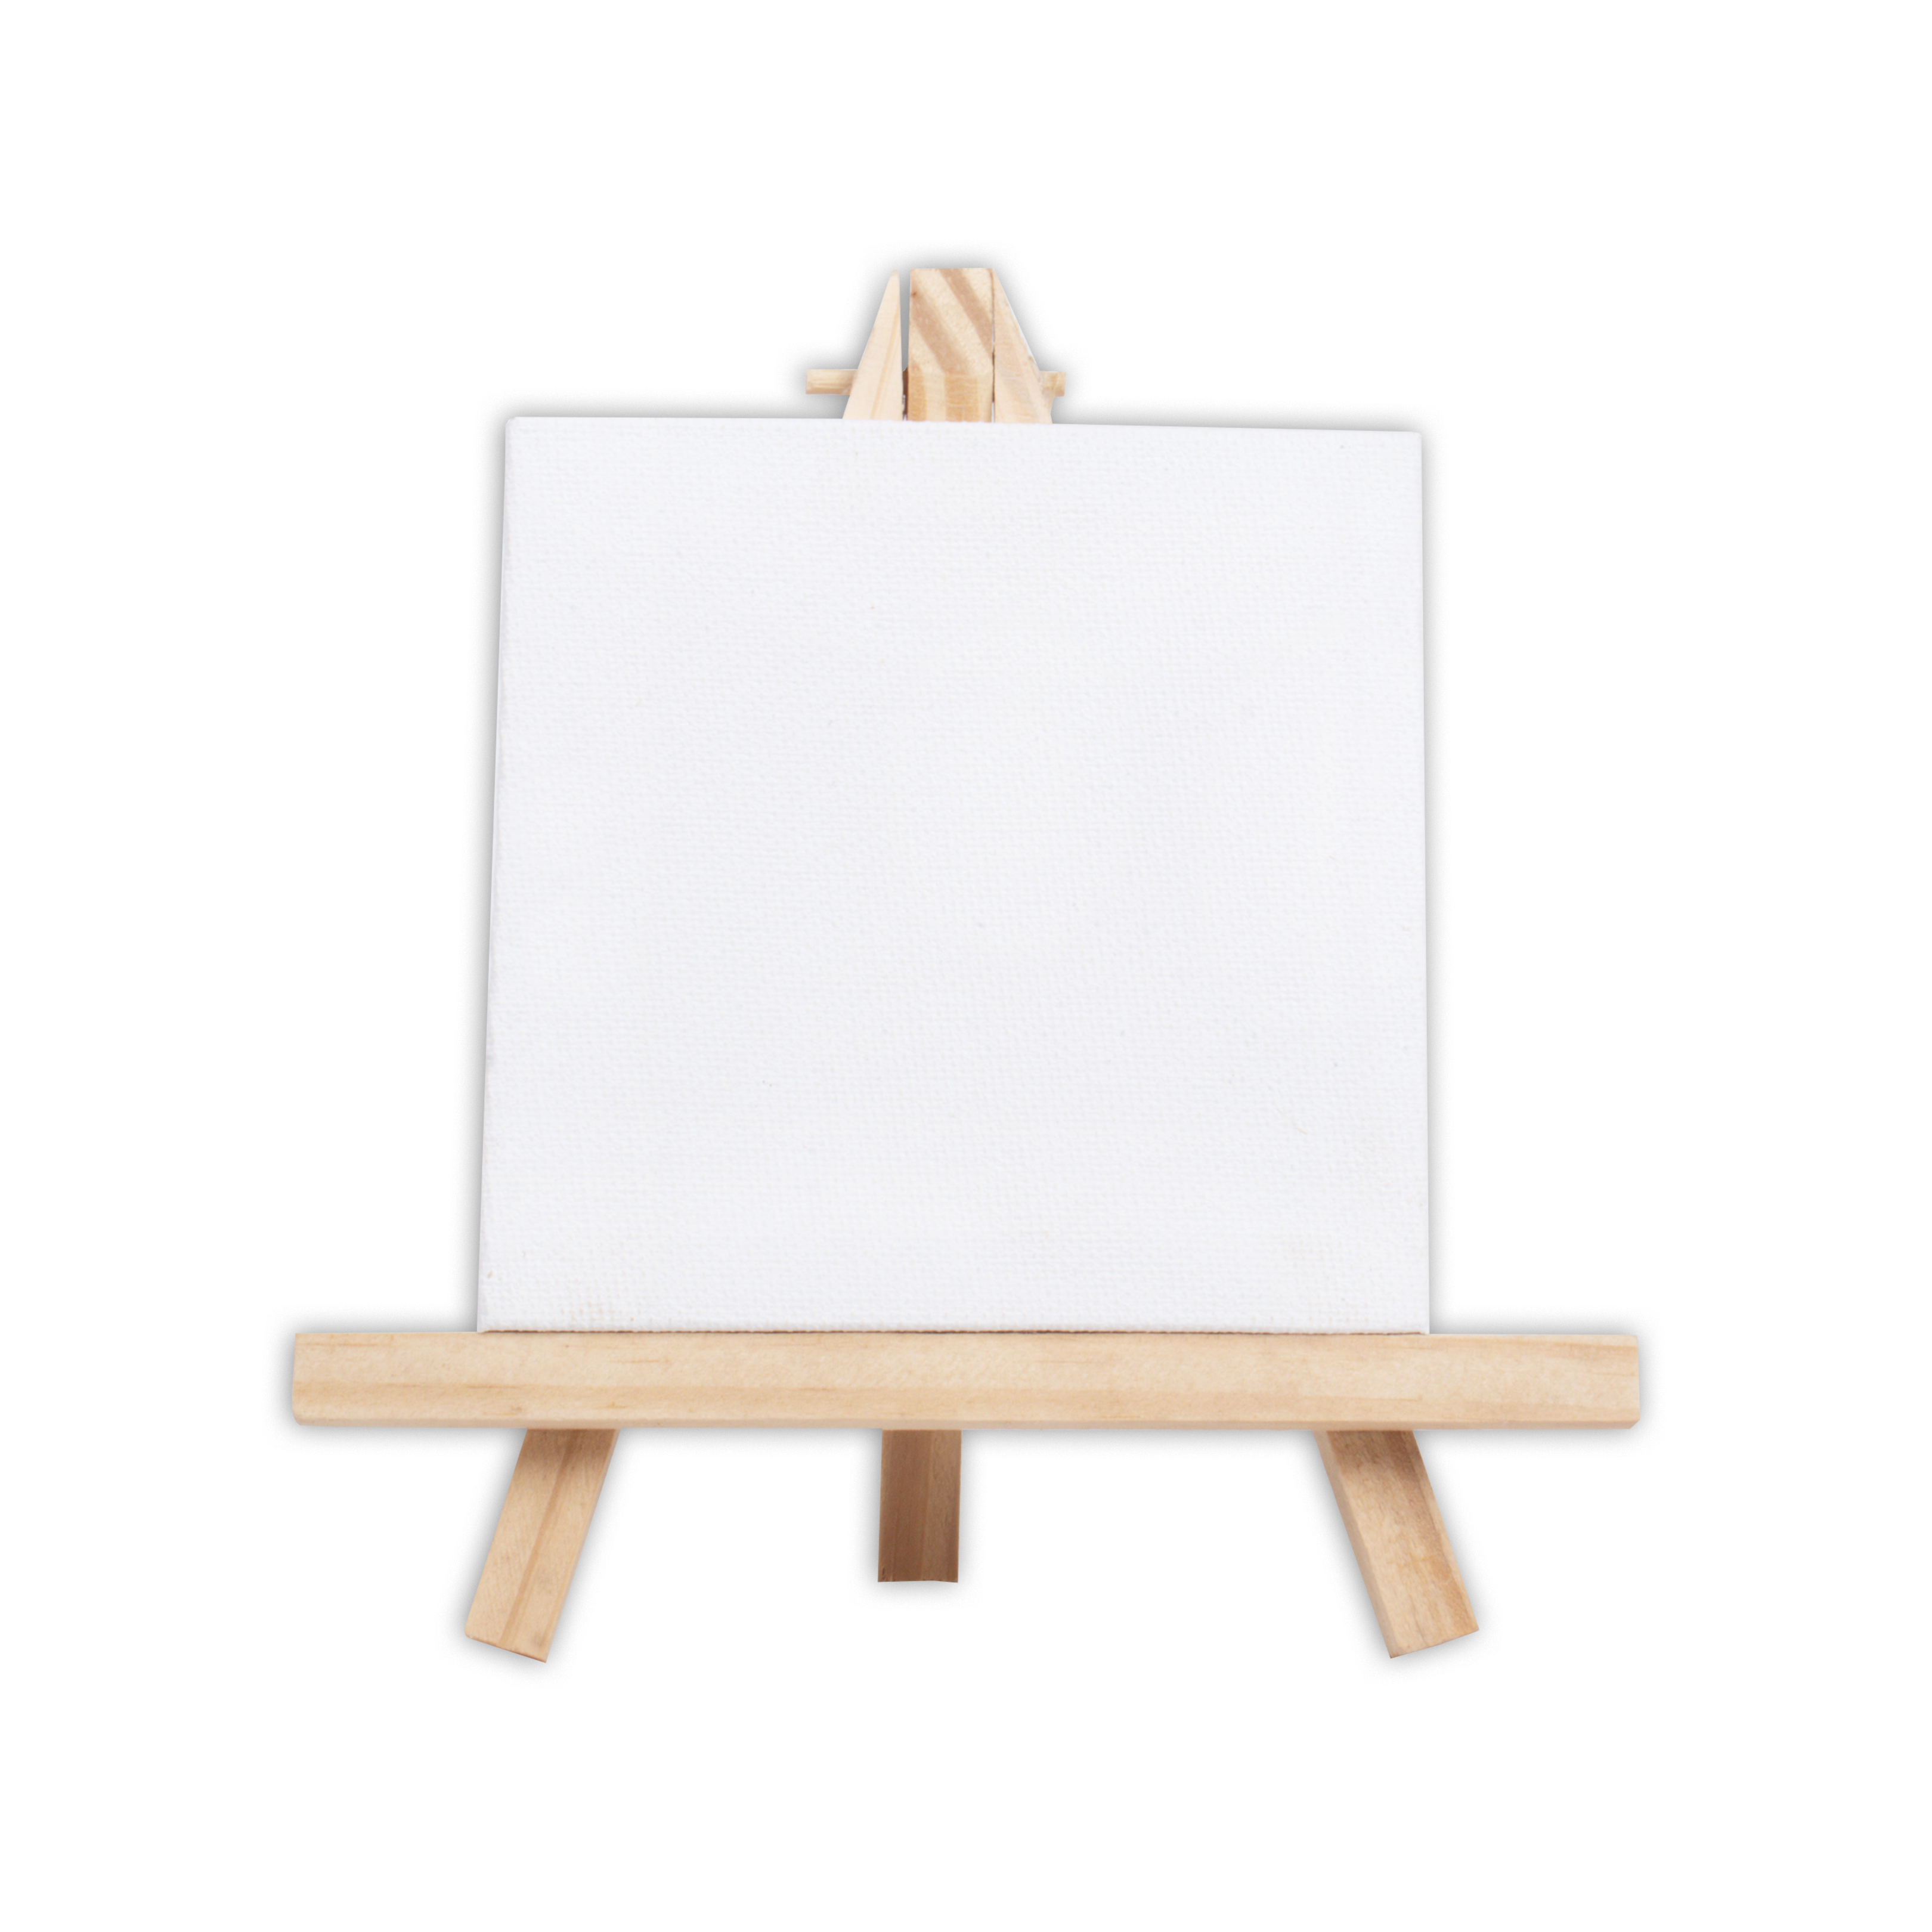 Wooden Mini Easel With Canvas Easel Size 15Cm & Canvas Size 10 X 10Cm Set Of 2Pc